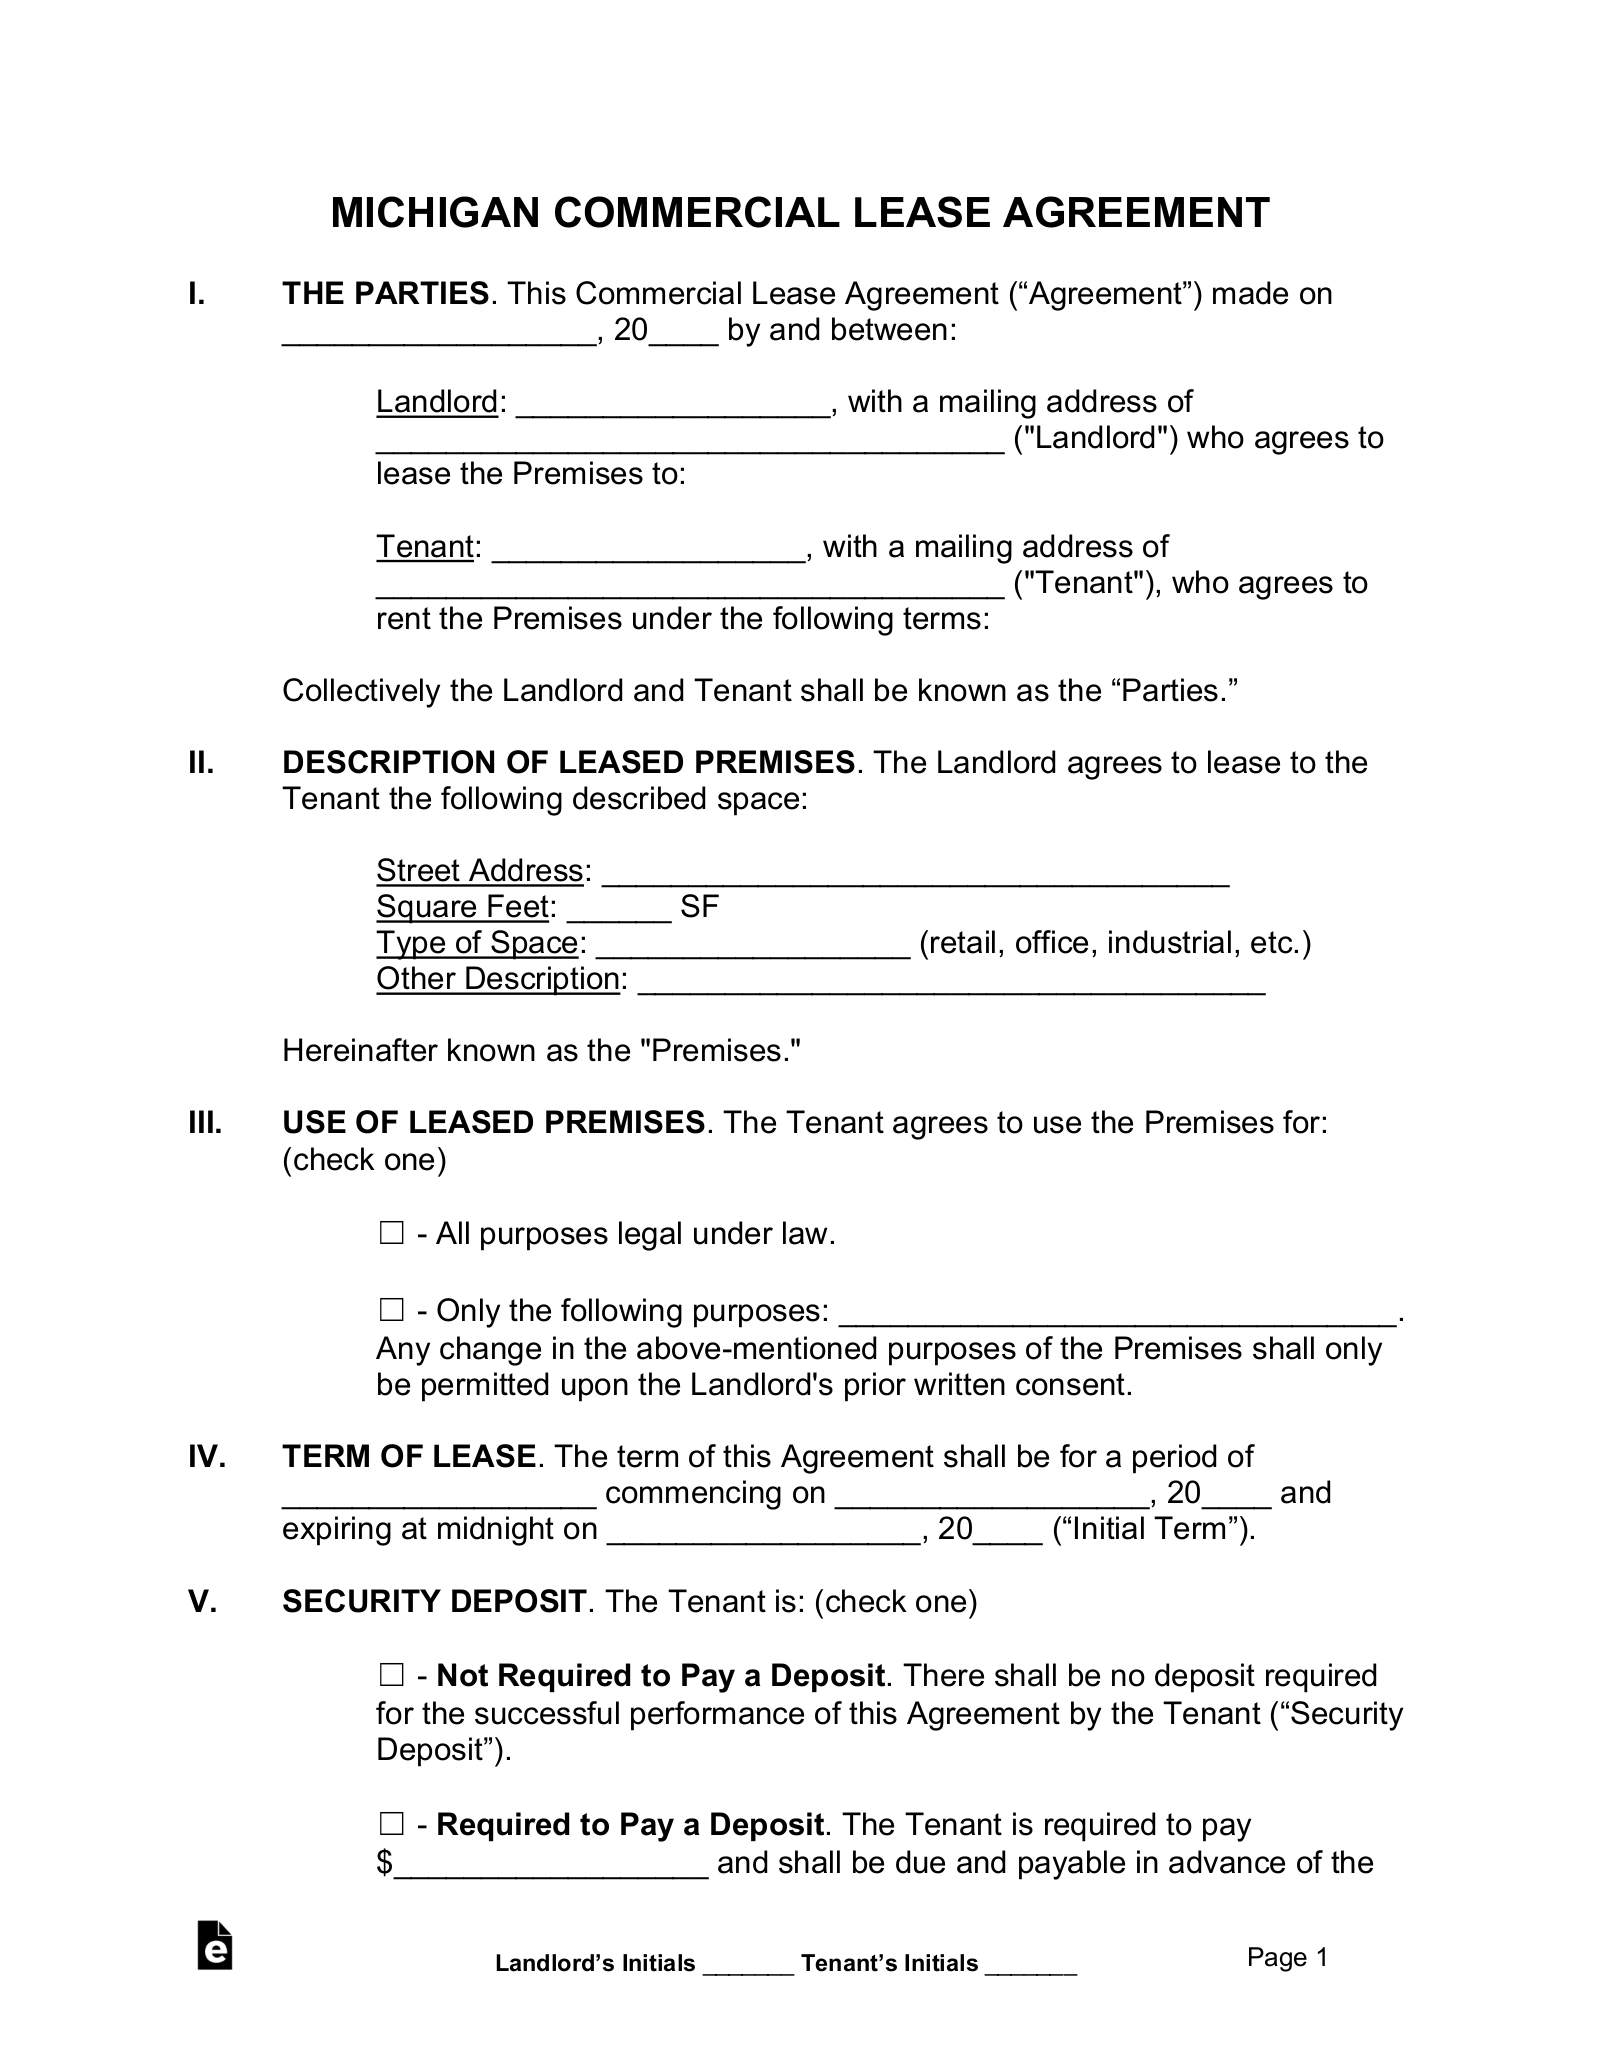 free-michigan-commercial-lease-agreement-template-pdf-word-eforms